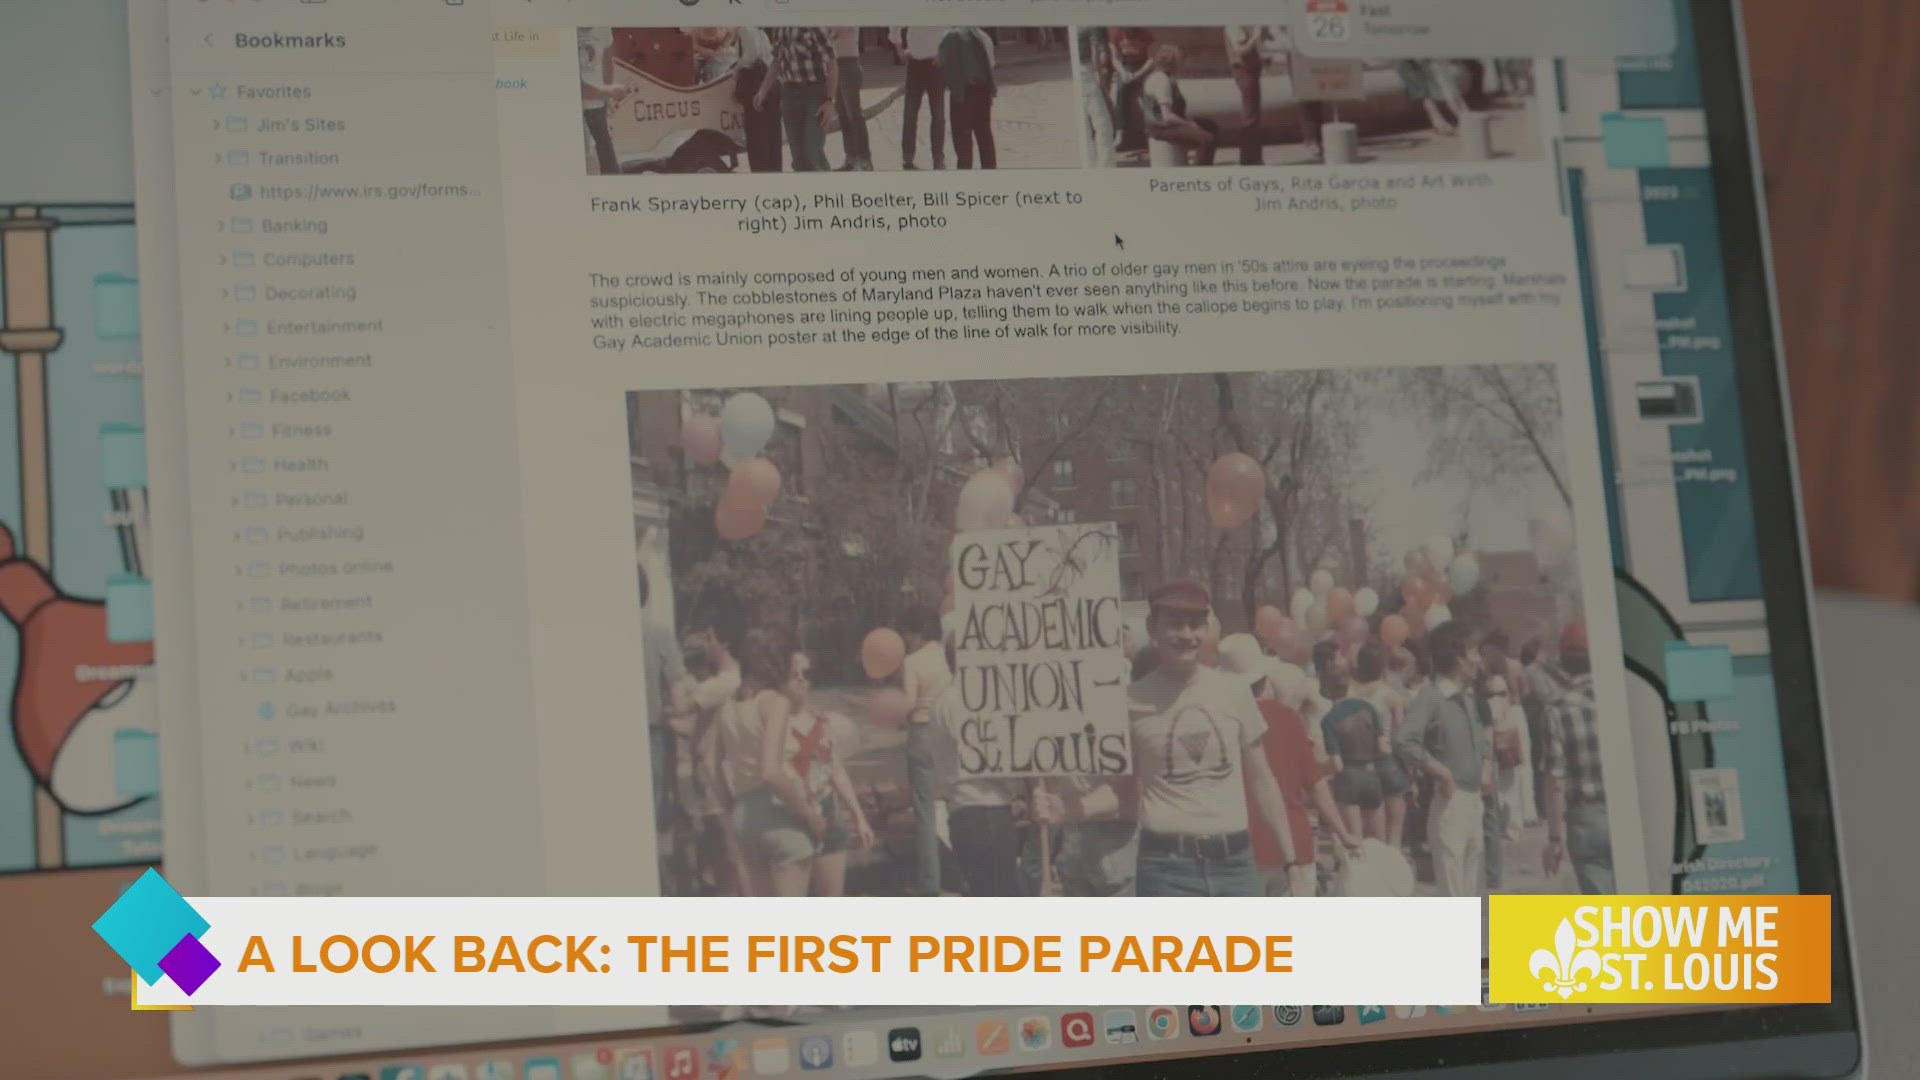 The exhibit detailing St. Louis' LGBTQIA+ history and culture will remain open for more than a year at the Missouri History Museum.